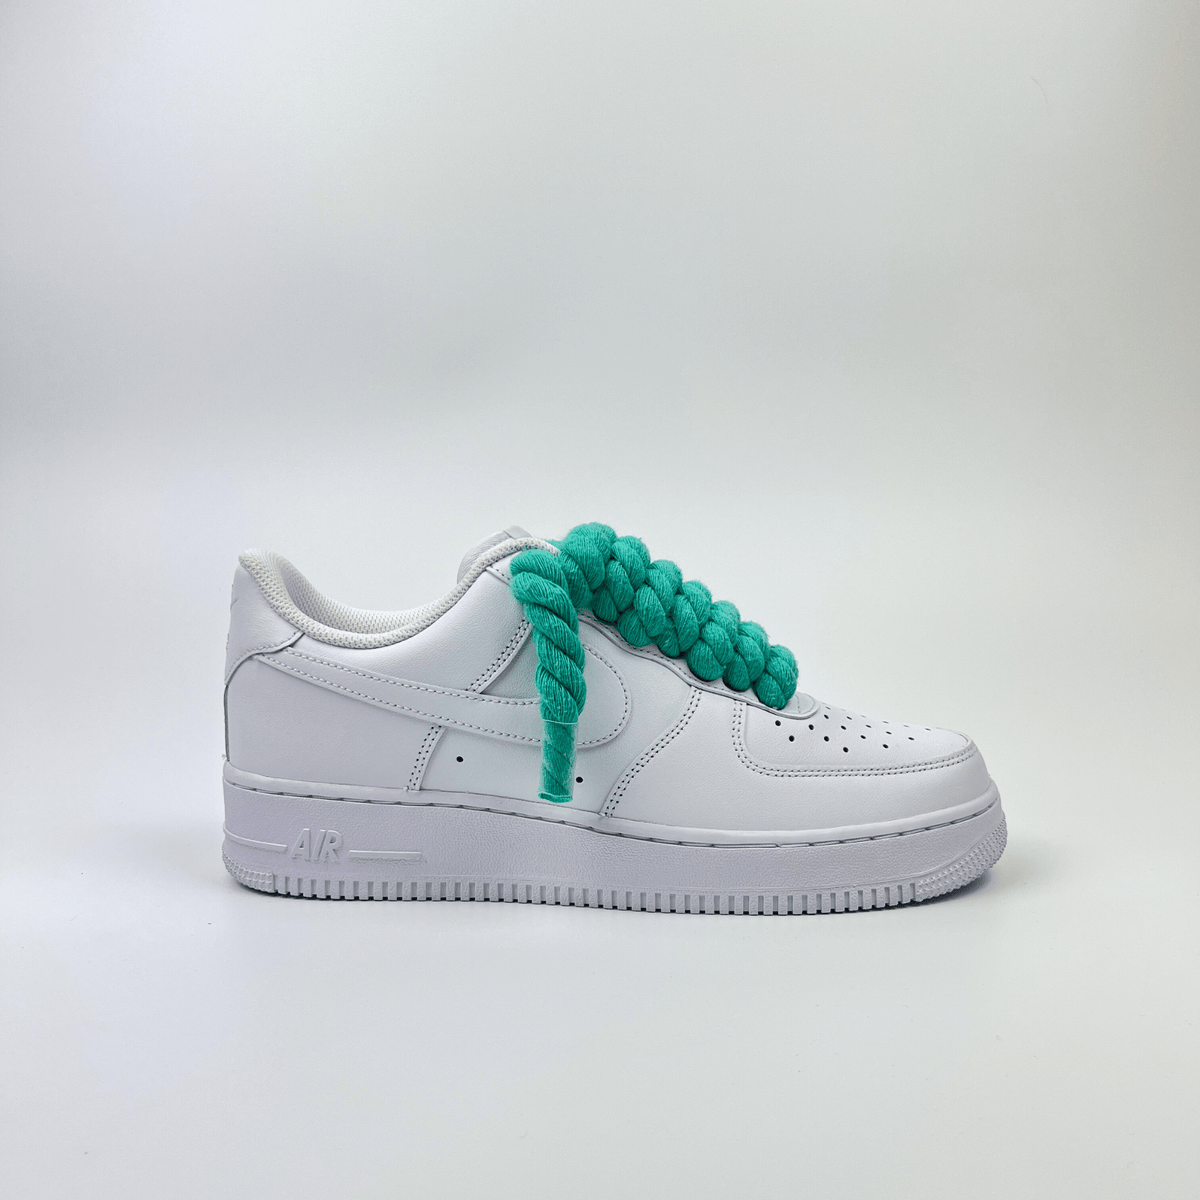 Rope Air Force 1 - Teal - No Sauce The Plug